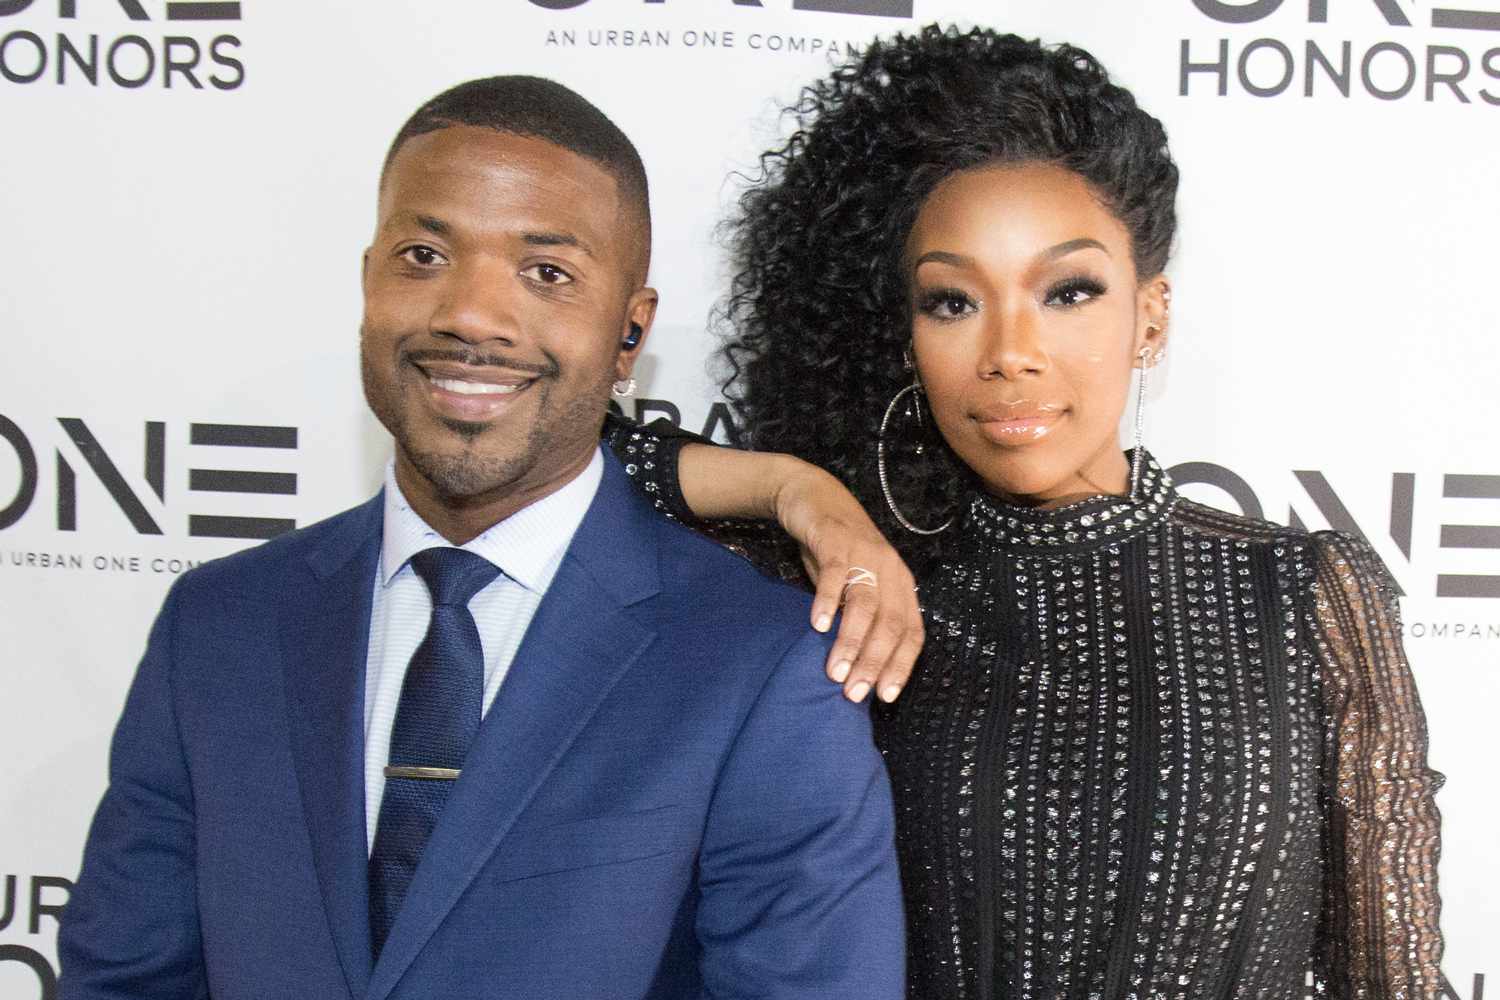 Ray J Addresses Backlash from Getting Sister Brandy's Face Tattooed: It 'Went Viral the Wrong Way'